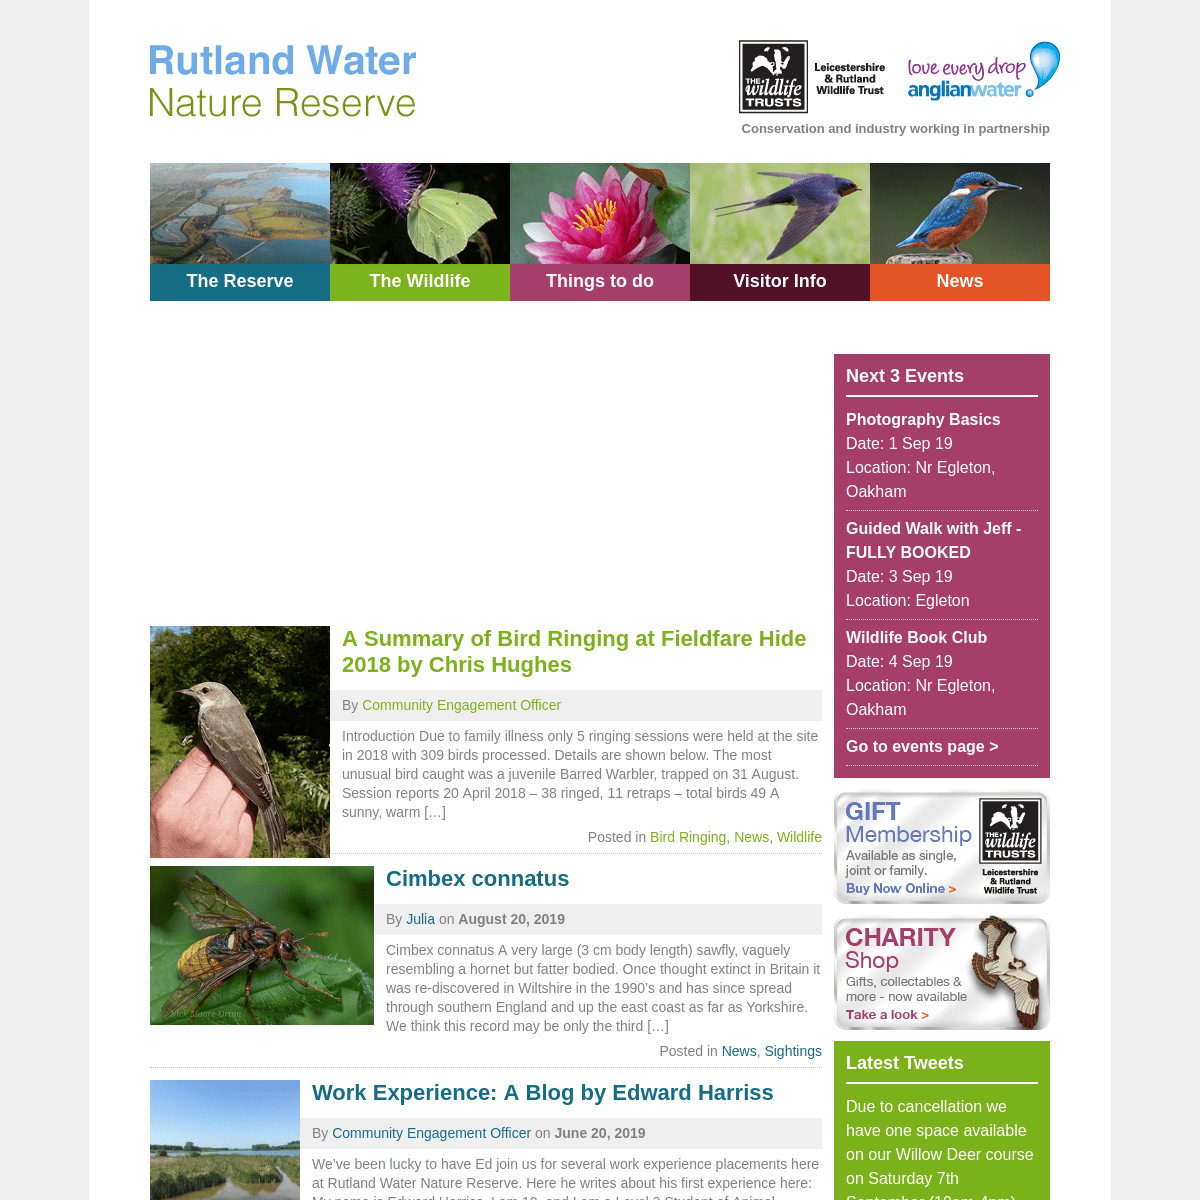 Rutland Water Nature Reserve: Conservation and industry working in partnership